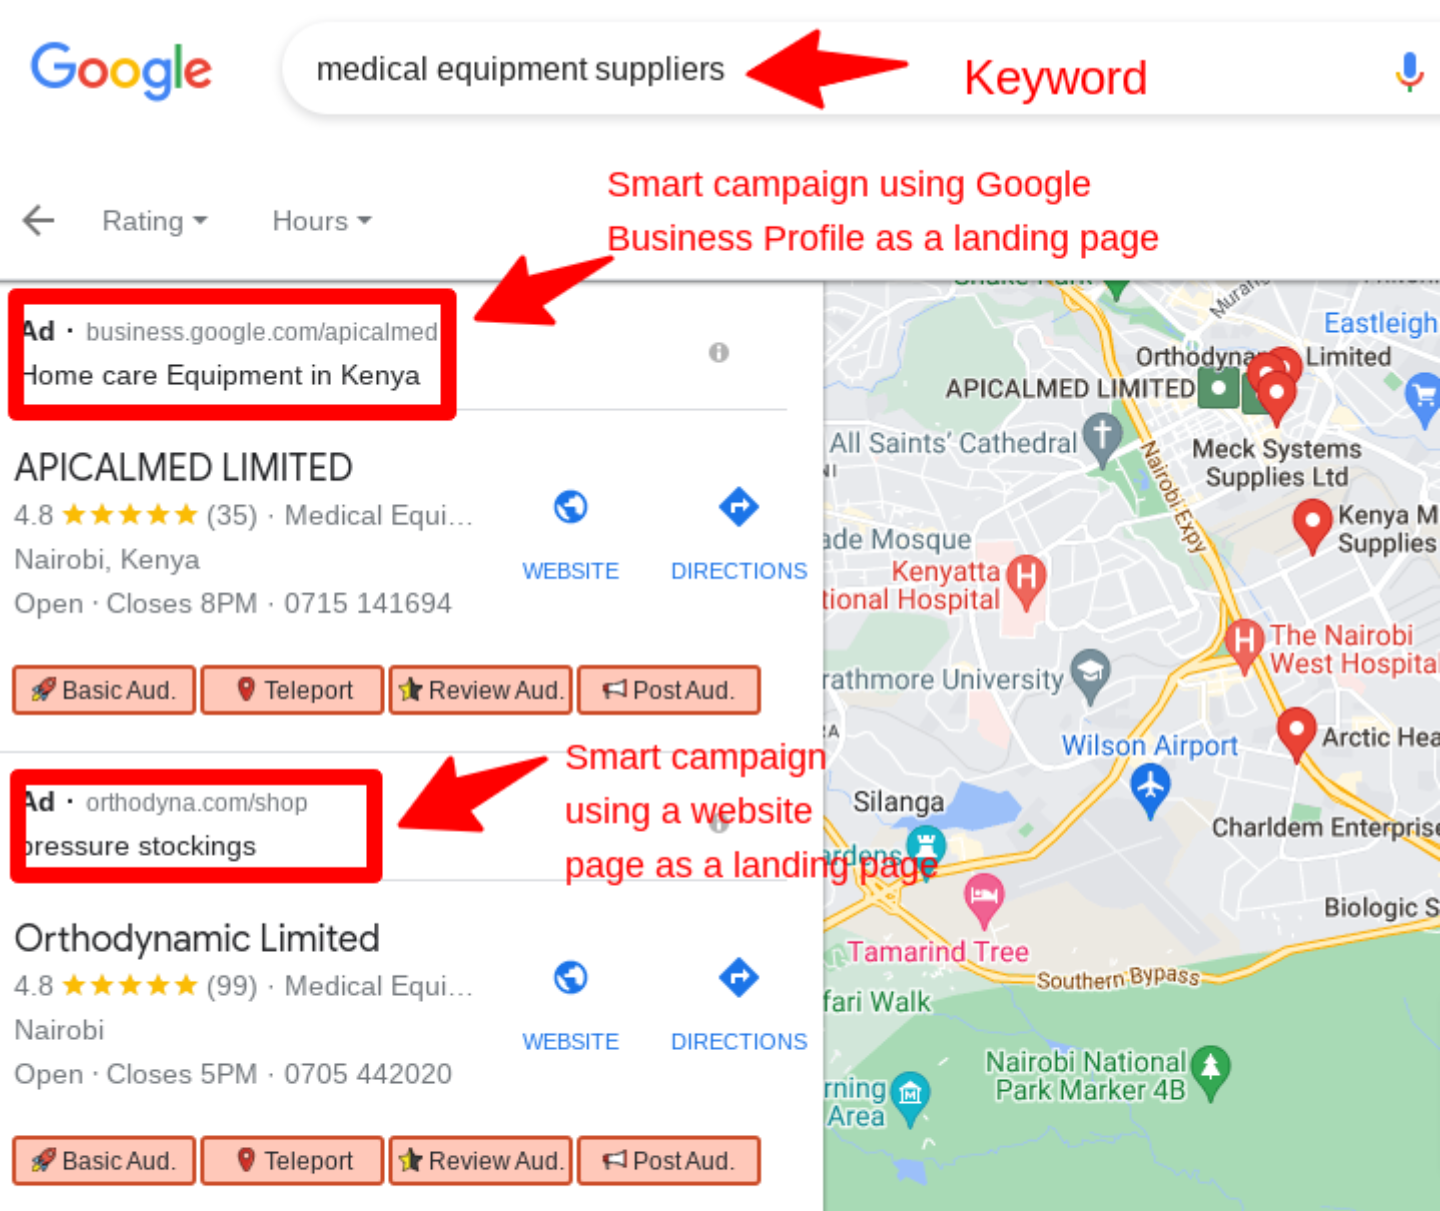 Smart campaigns showing on Google maps